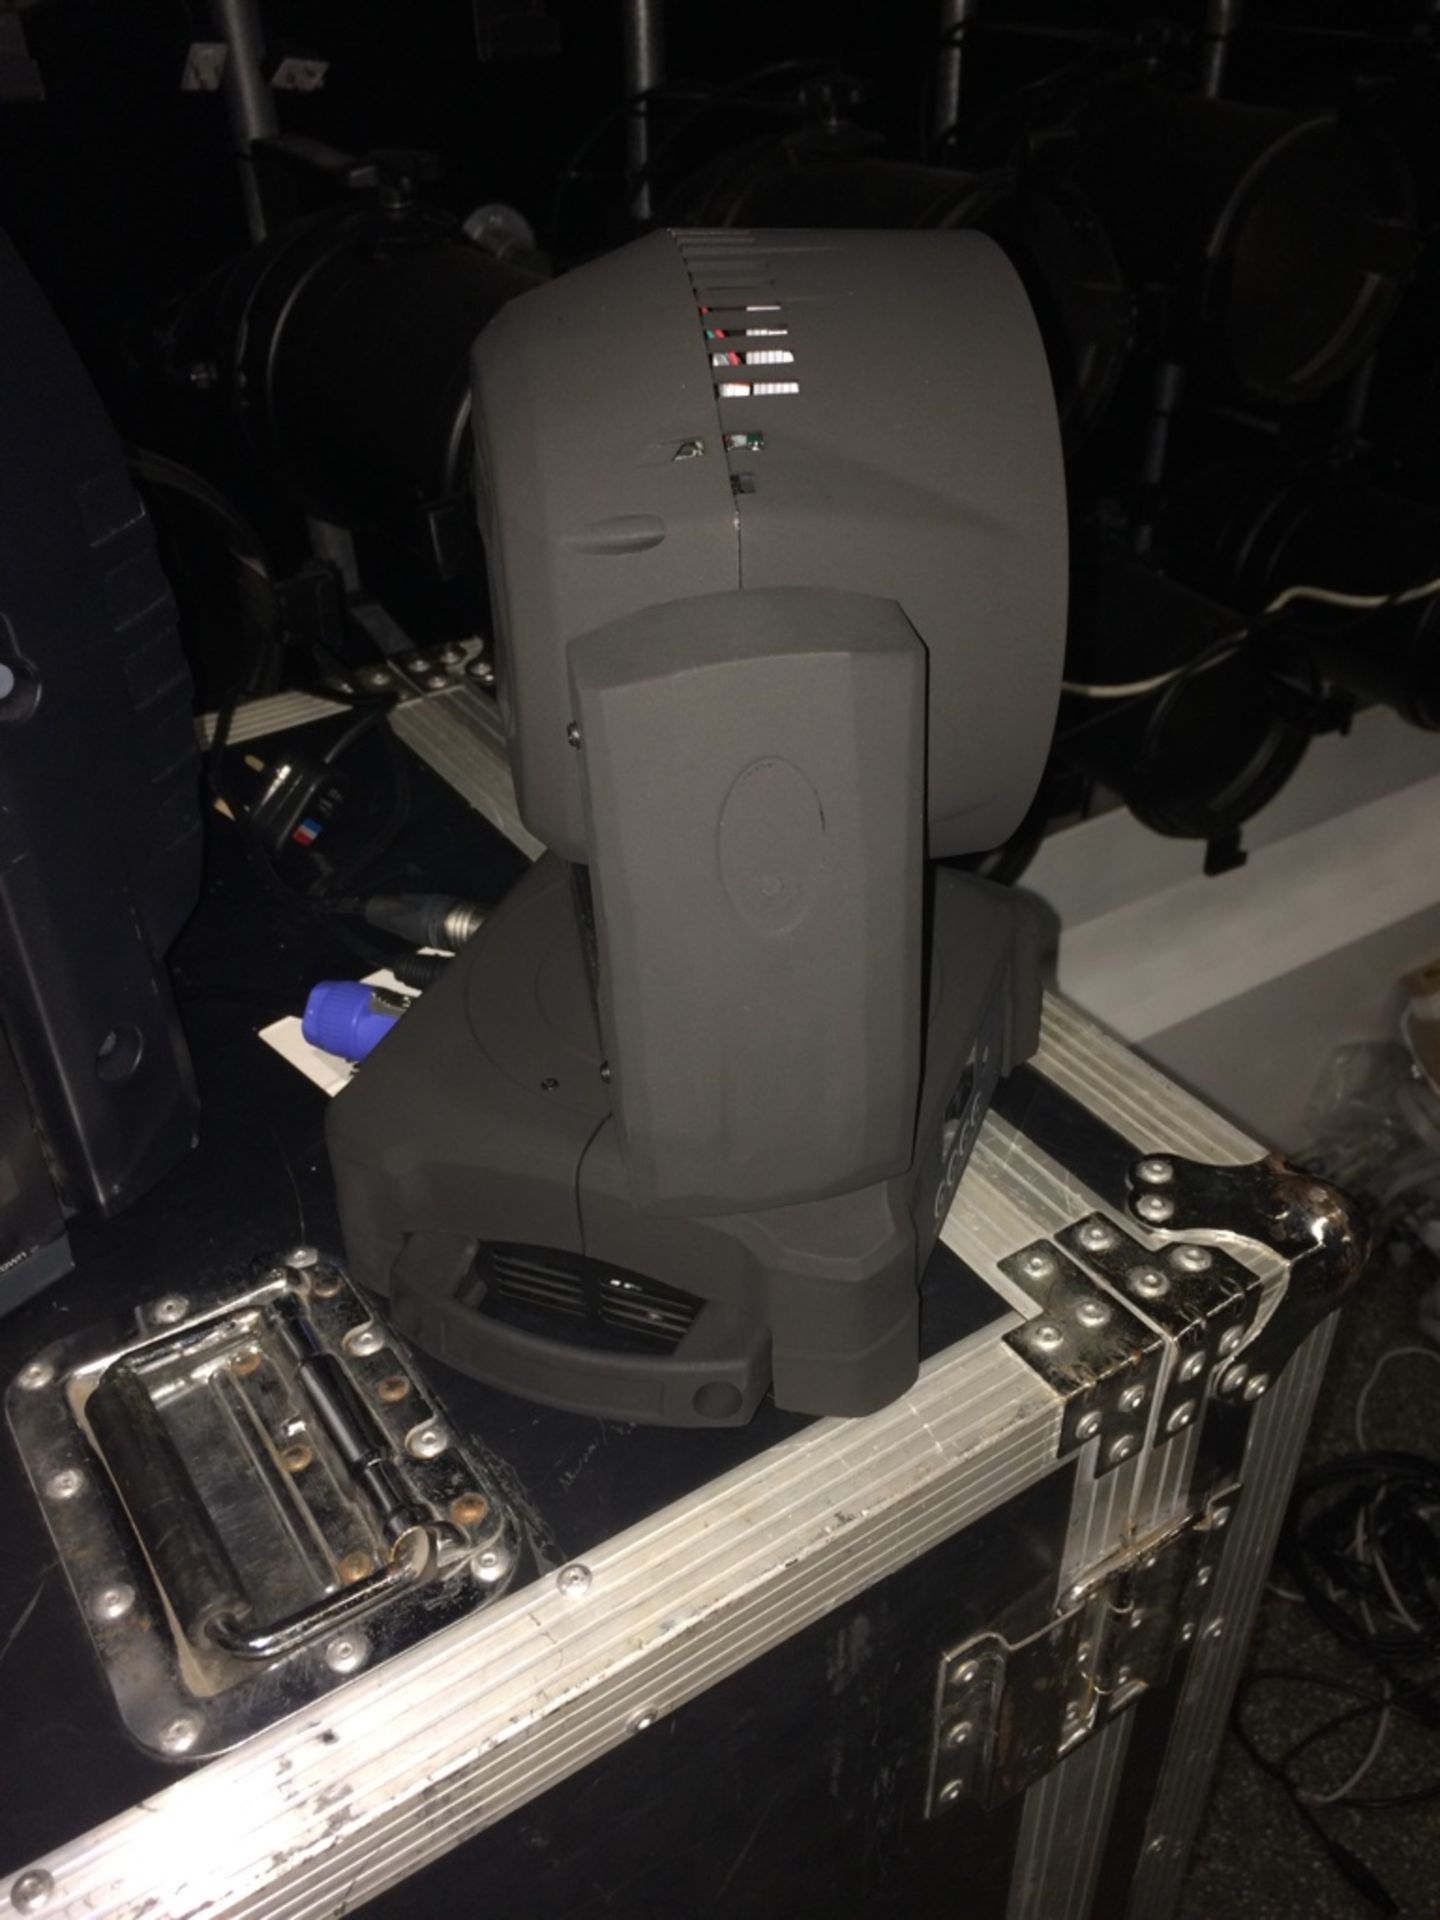 Led Moving Head Light - New Only Taken Out Of Box To Test - Image 2 of 4